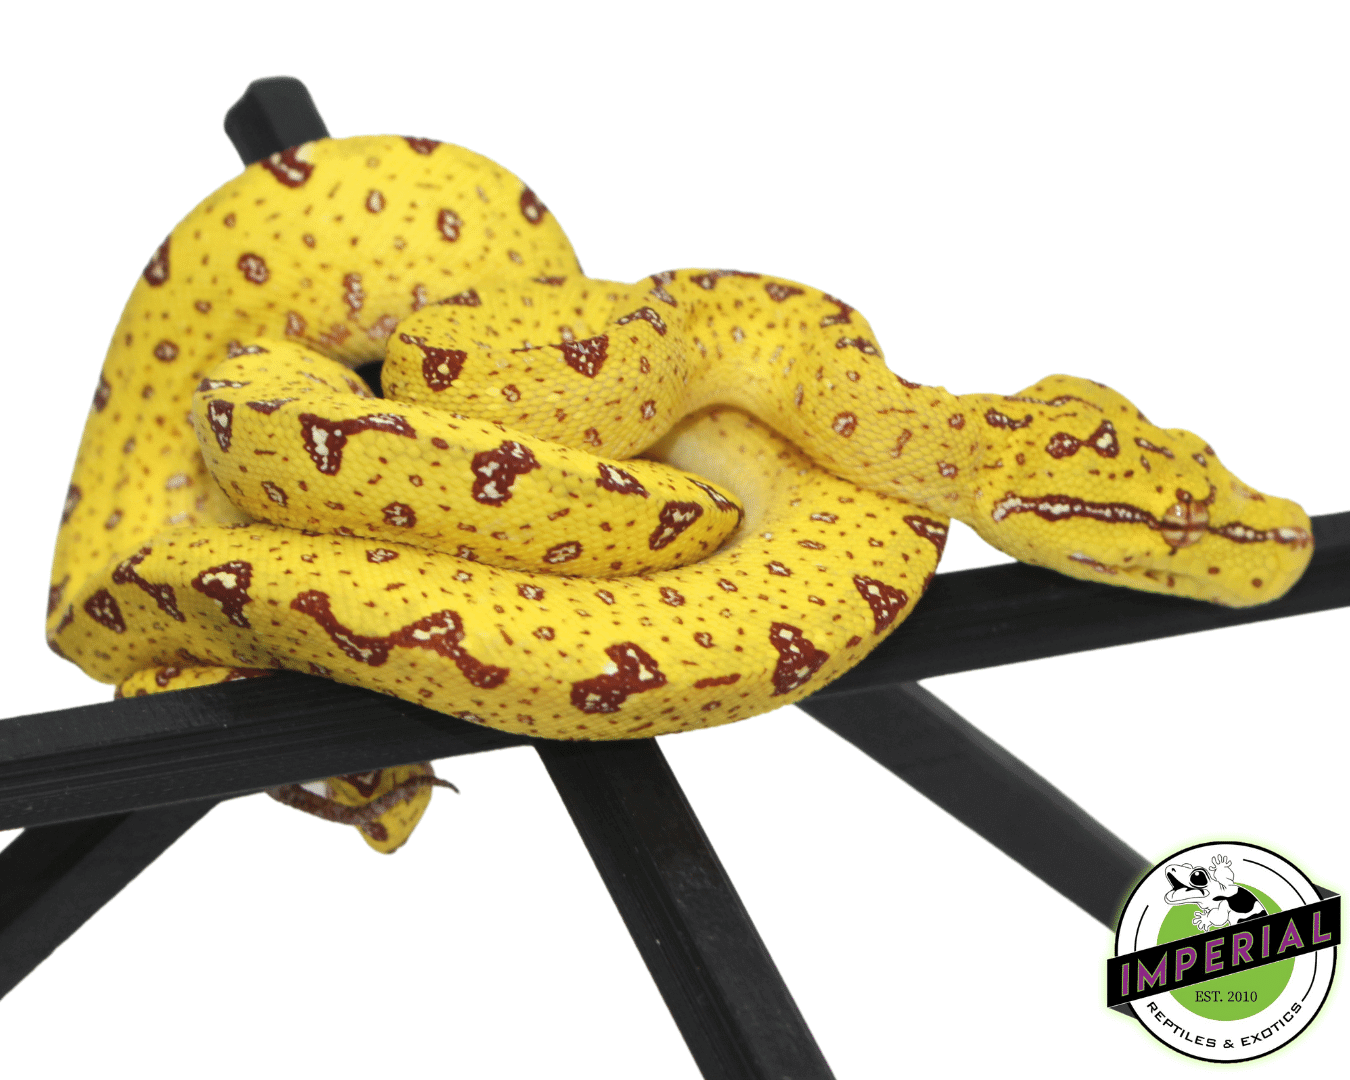 yellow green tree python for sale, buy reptiles online